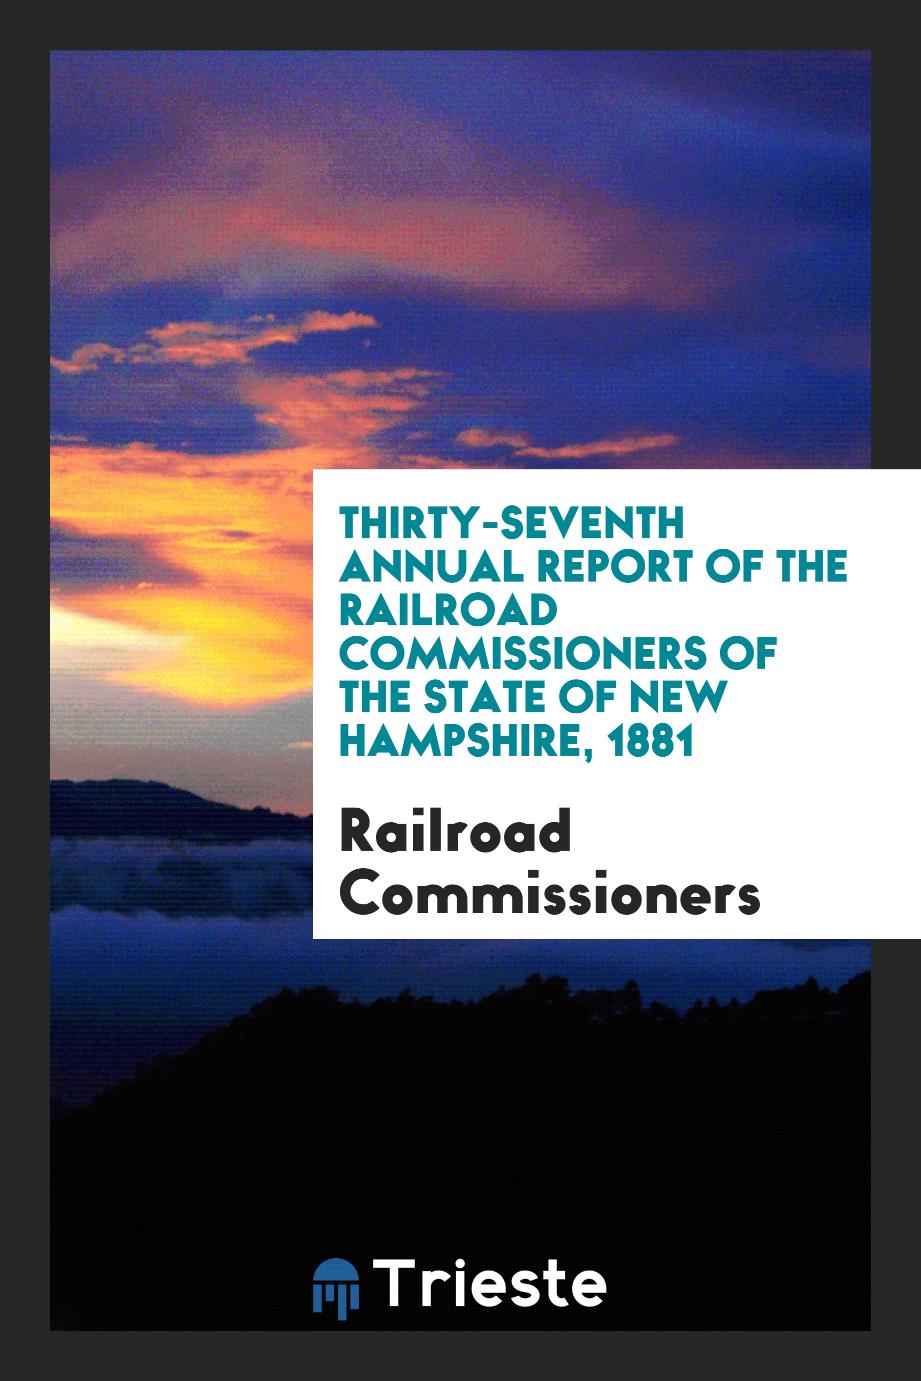 Thirty-Seventh Annual Report of the Railroad Commissioners of the State of New Hampshire, 1881